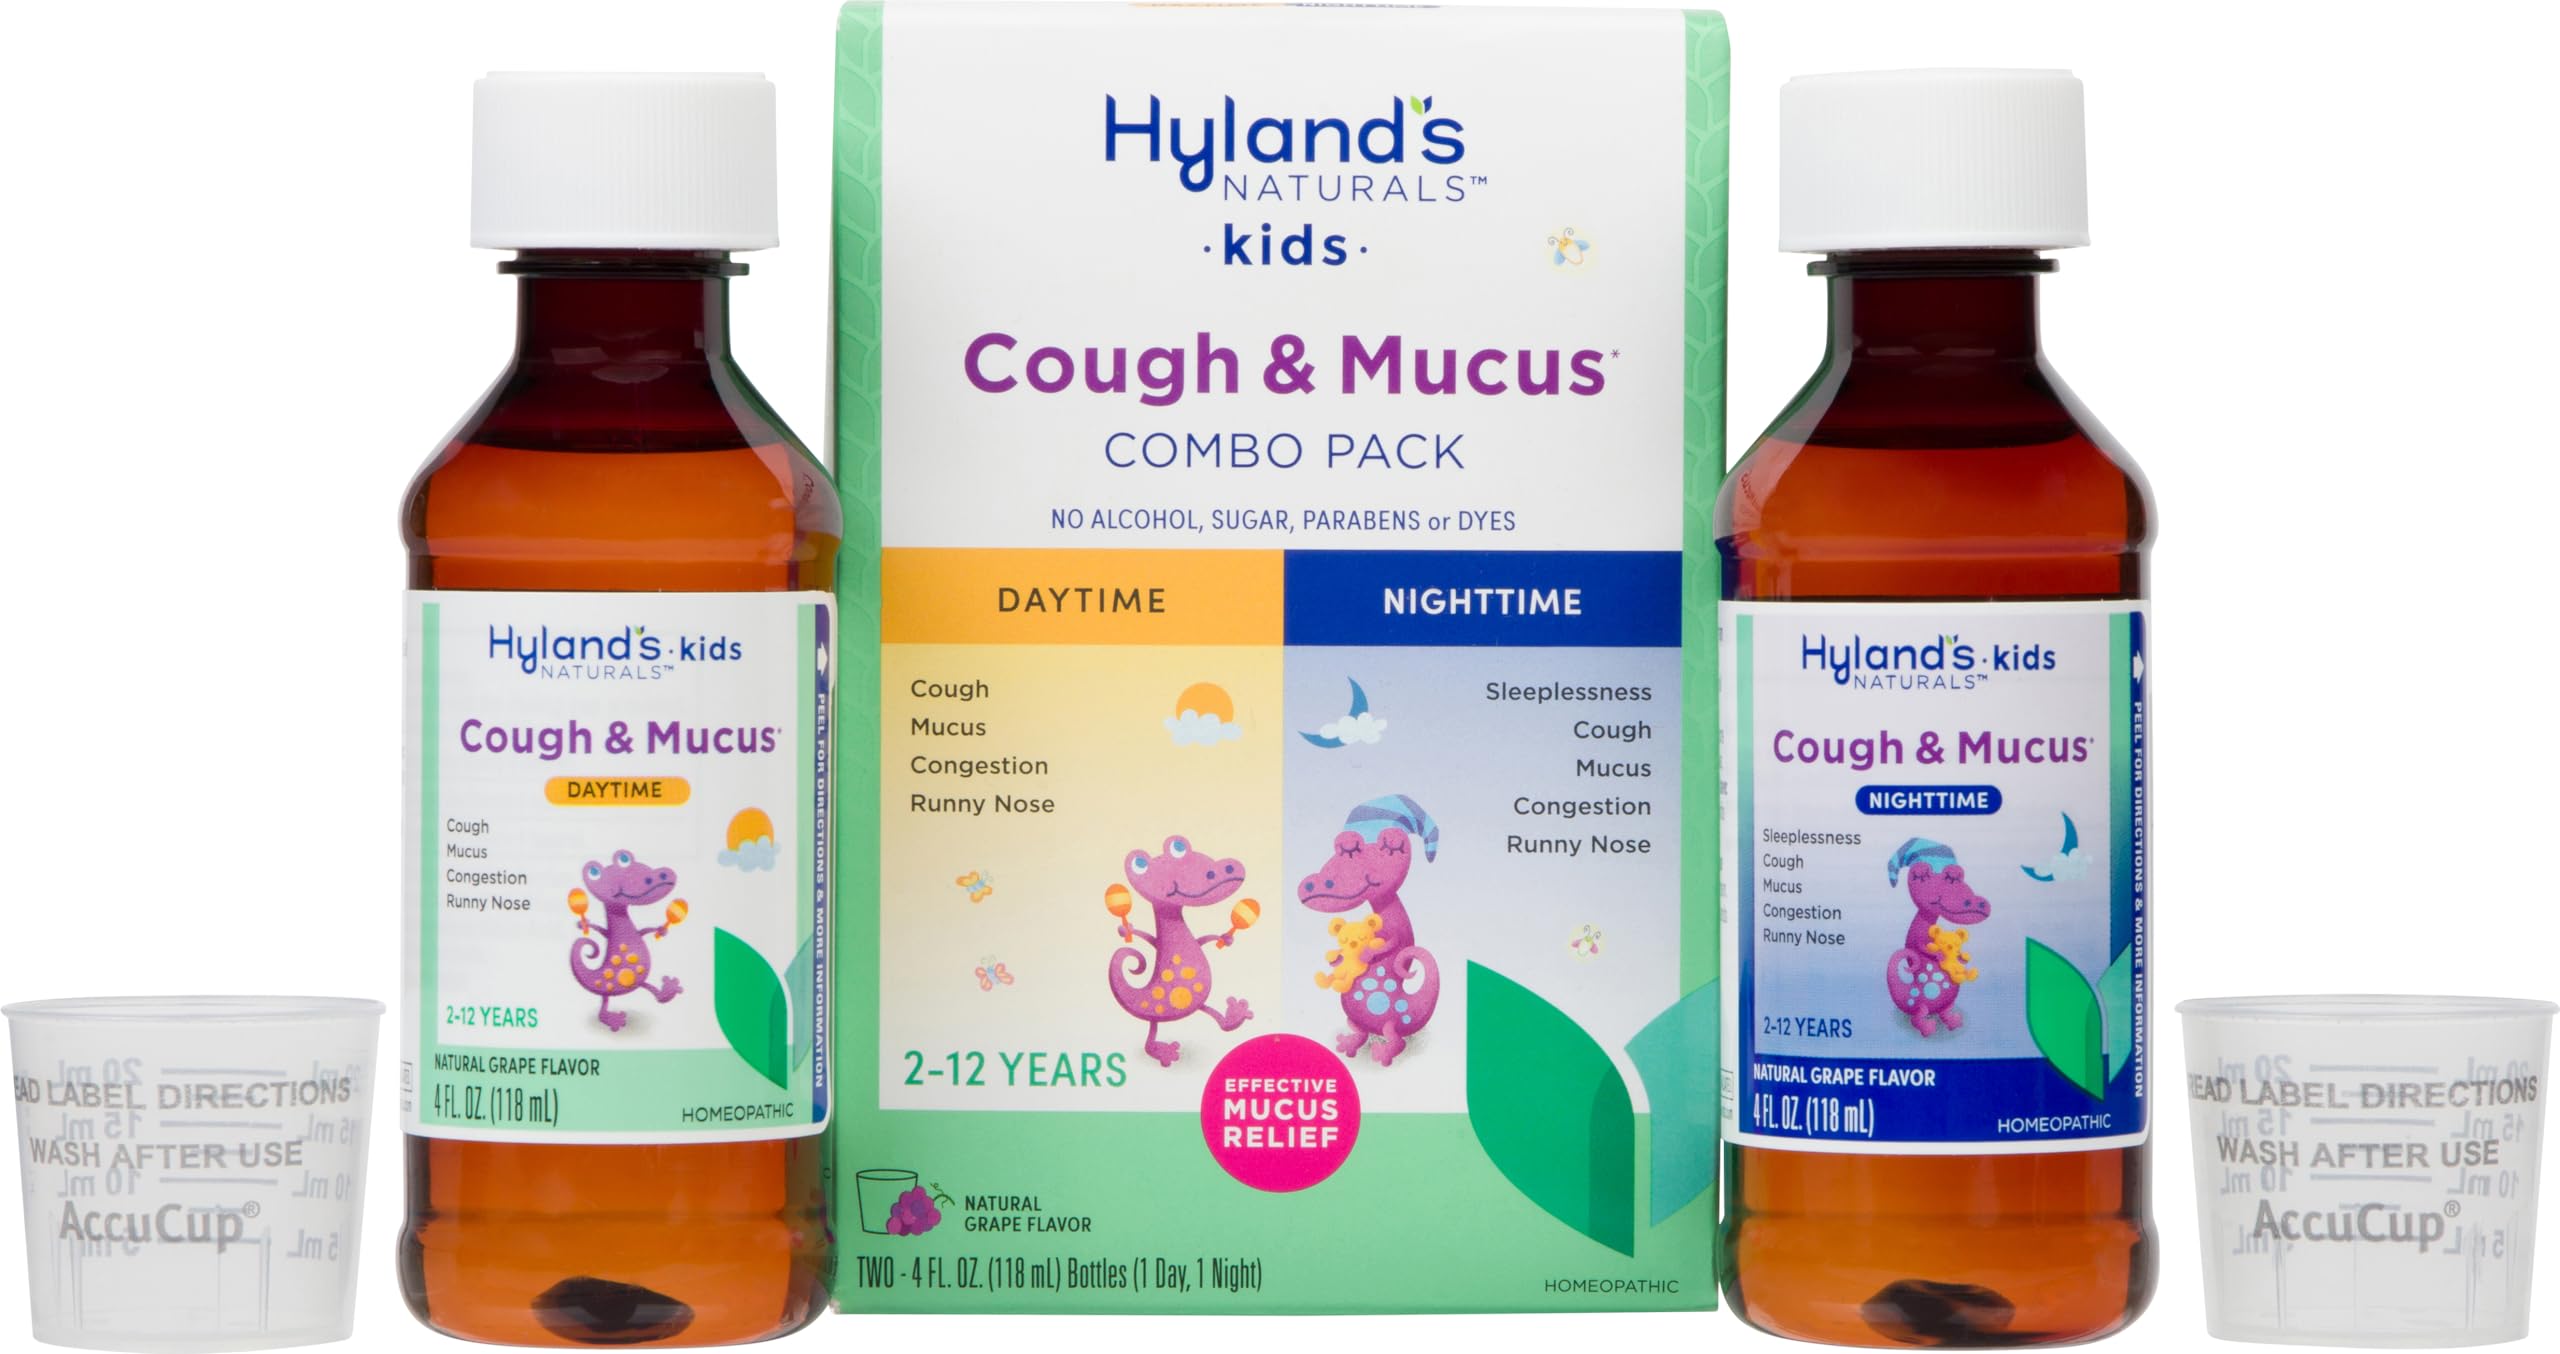 Hyland's Naturals Kids Cough & Mucus Daytime & Nighttime Combo Pack & Naturals Kids Stuffy Nose & Sinus Tablets